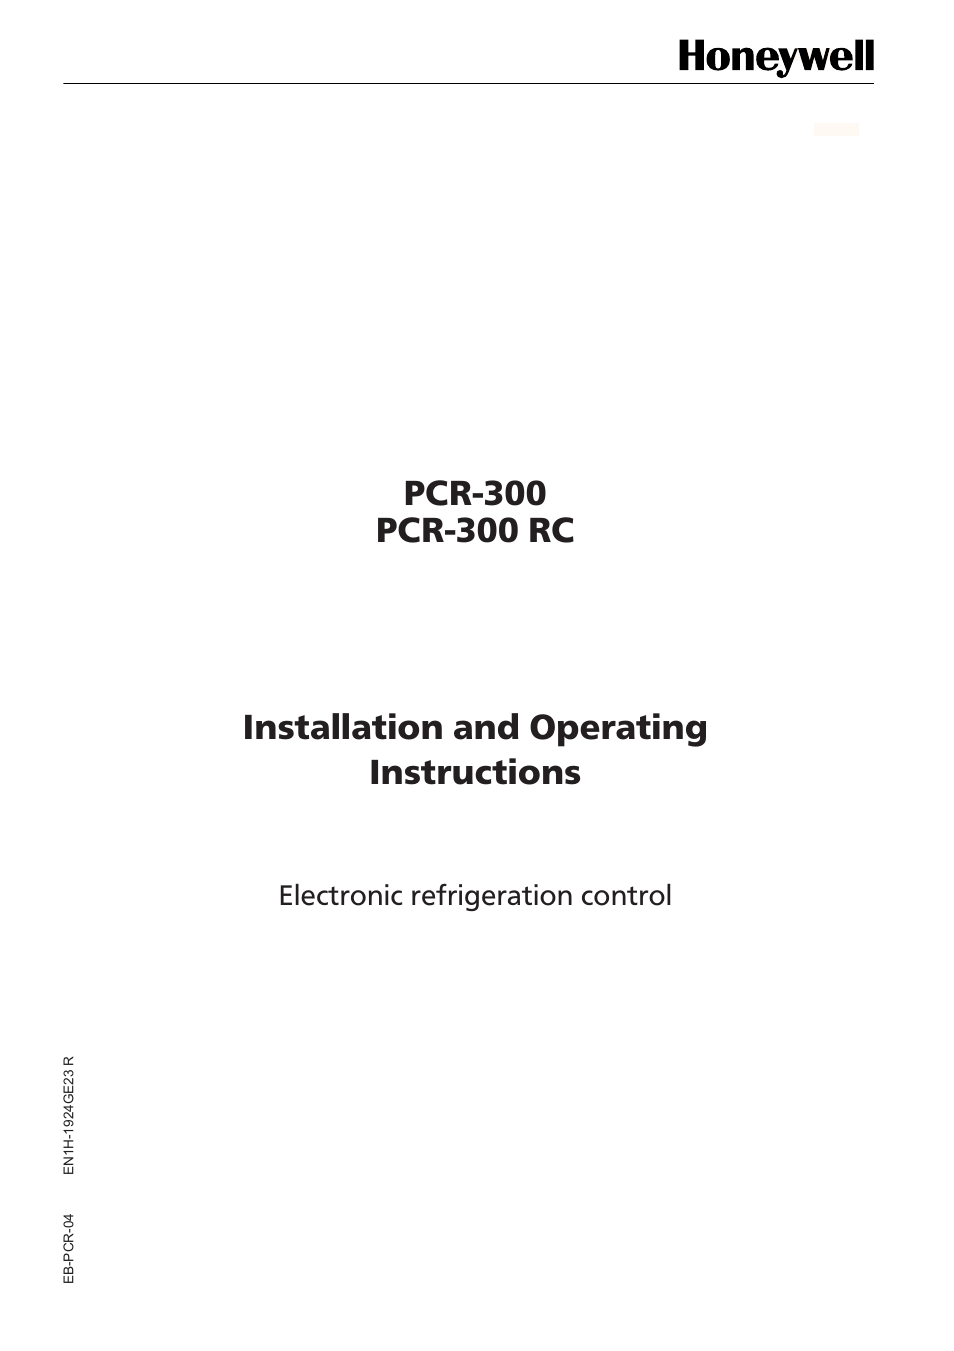 Honeywell ELECTRONIC REFRIGERATION CONTROL PCR-300 User Manual | 20 pages